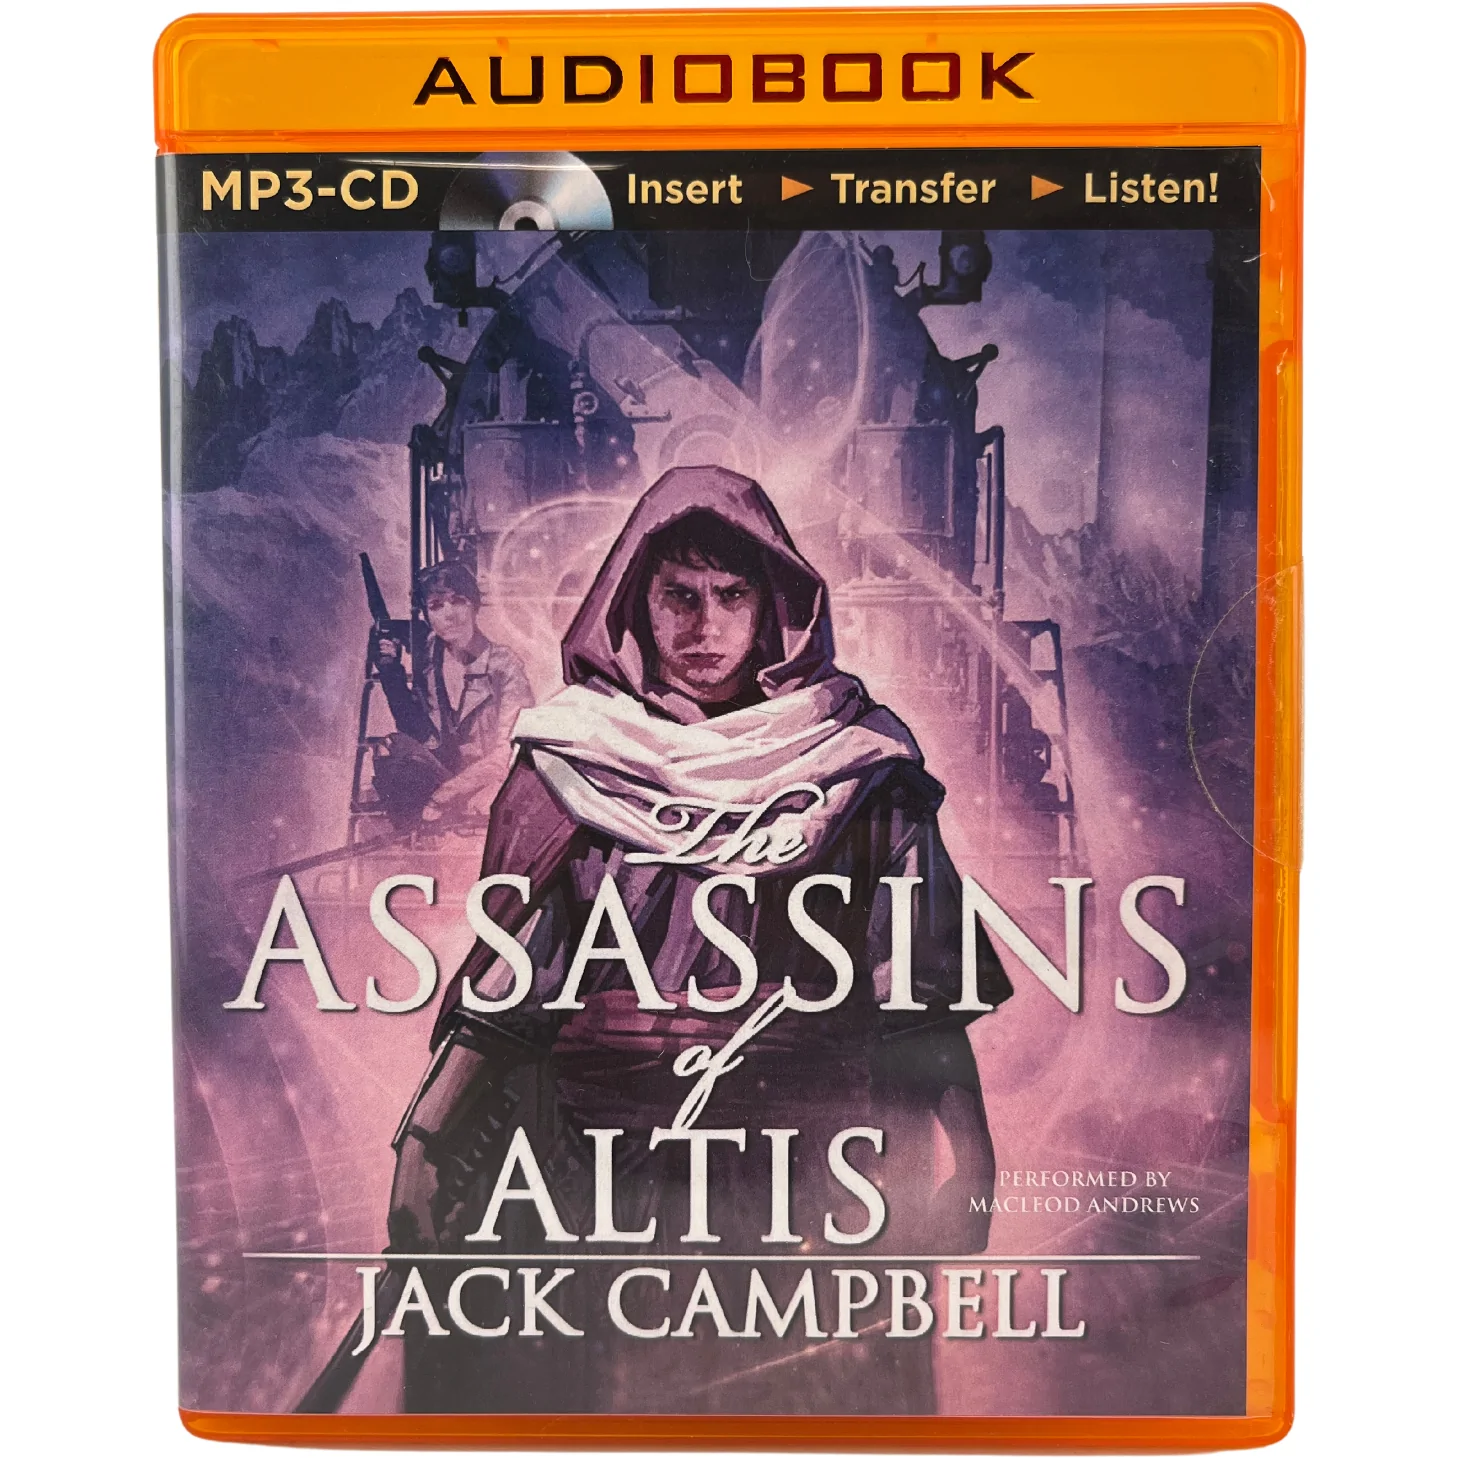 Audiobook "The Assassins of Altis" / Author Jack Campbell / MP3-CD